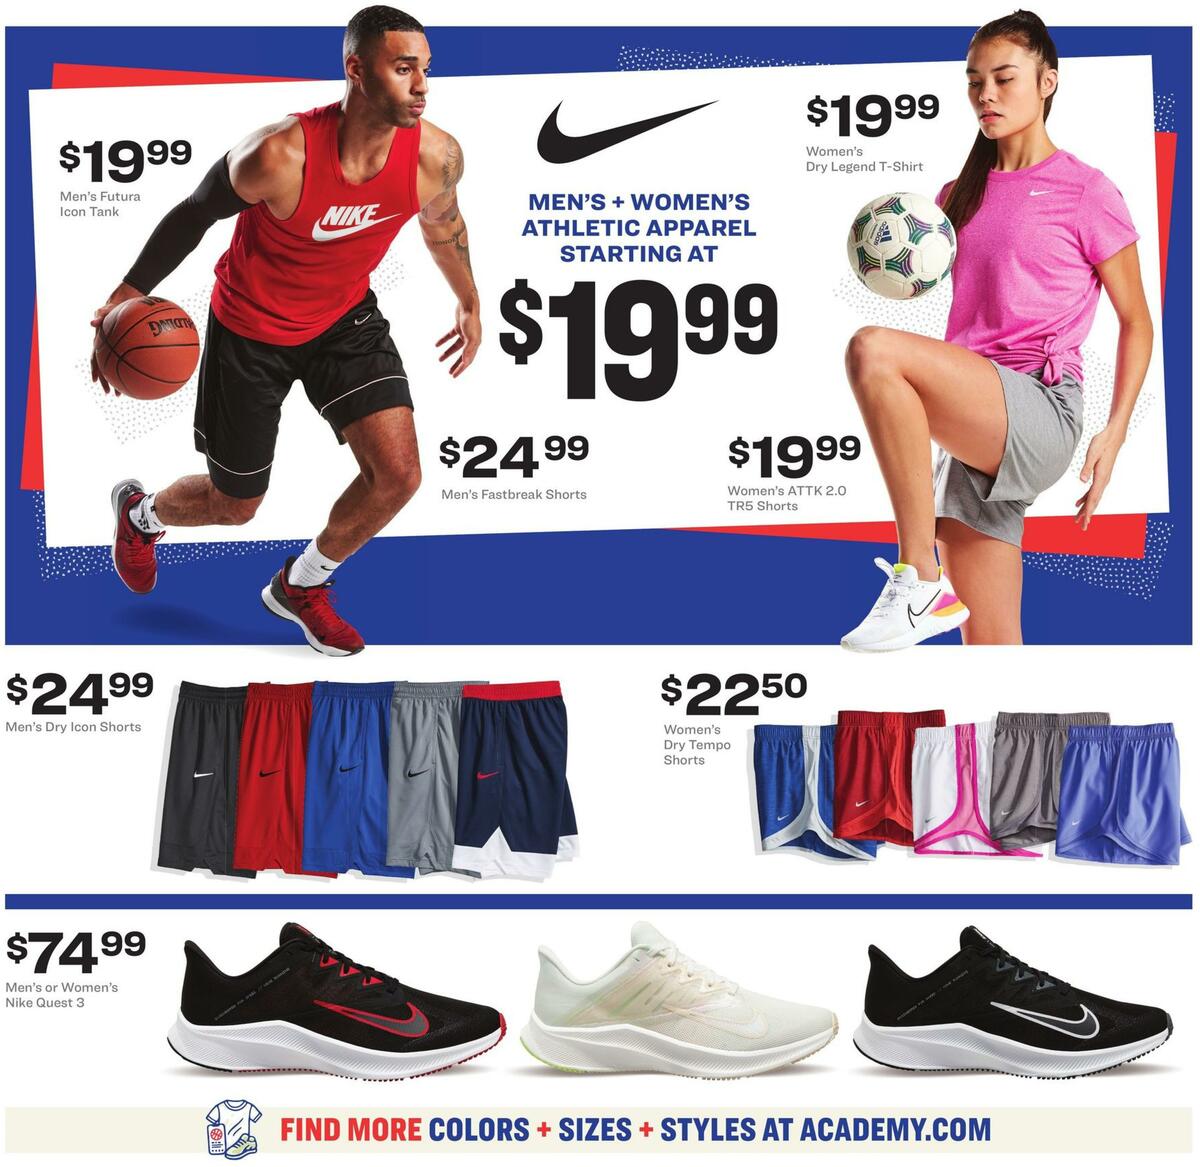 Academy Sports + Outdoors Weekly Ad from July 20